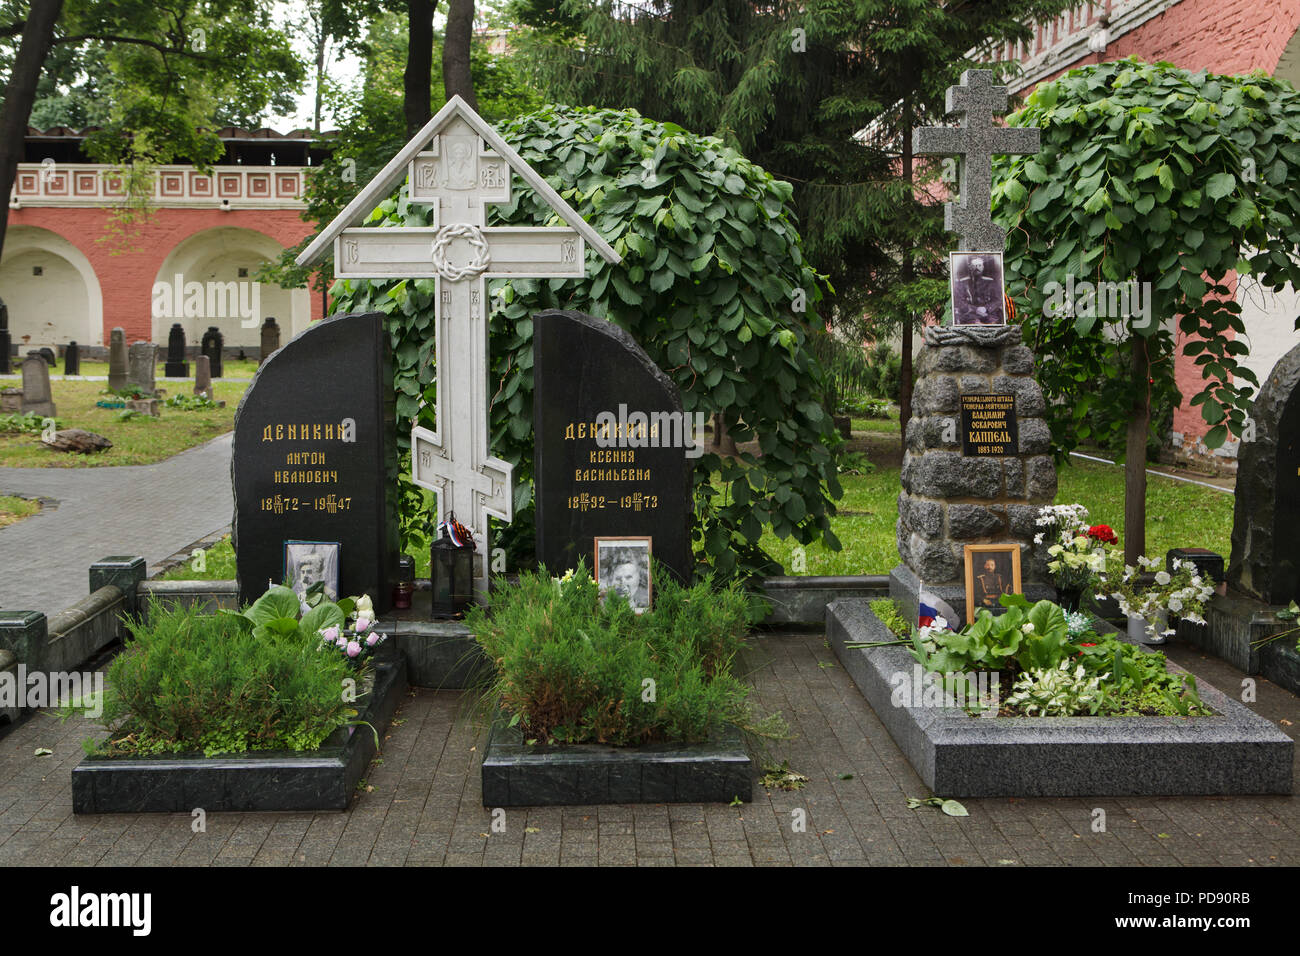 Graves of Russian military leader Anton Denikin and his wife Xenia Denikina, Russian military leader Vladimir Kappel (pictured from left to right) at the cemetery of the Donskoy Monastery in Moscow, Russia. The remains of the leading figures of the White movement during the Russian Civil War were transferred to Moscow from the United States, France and China in 2005 and 2006. Stock Photo